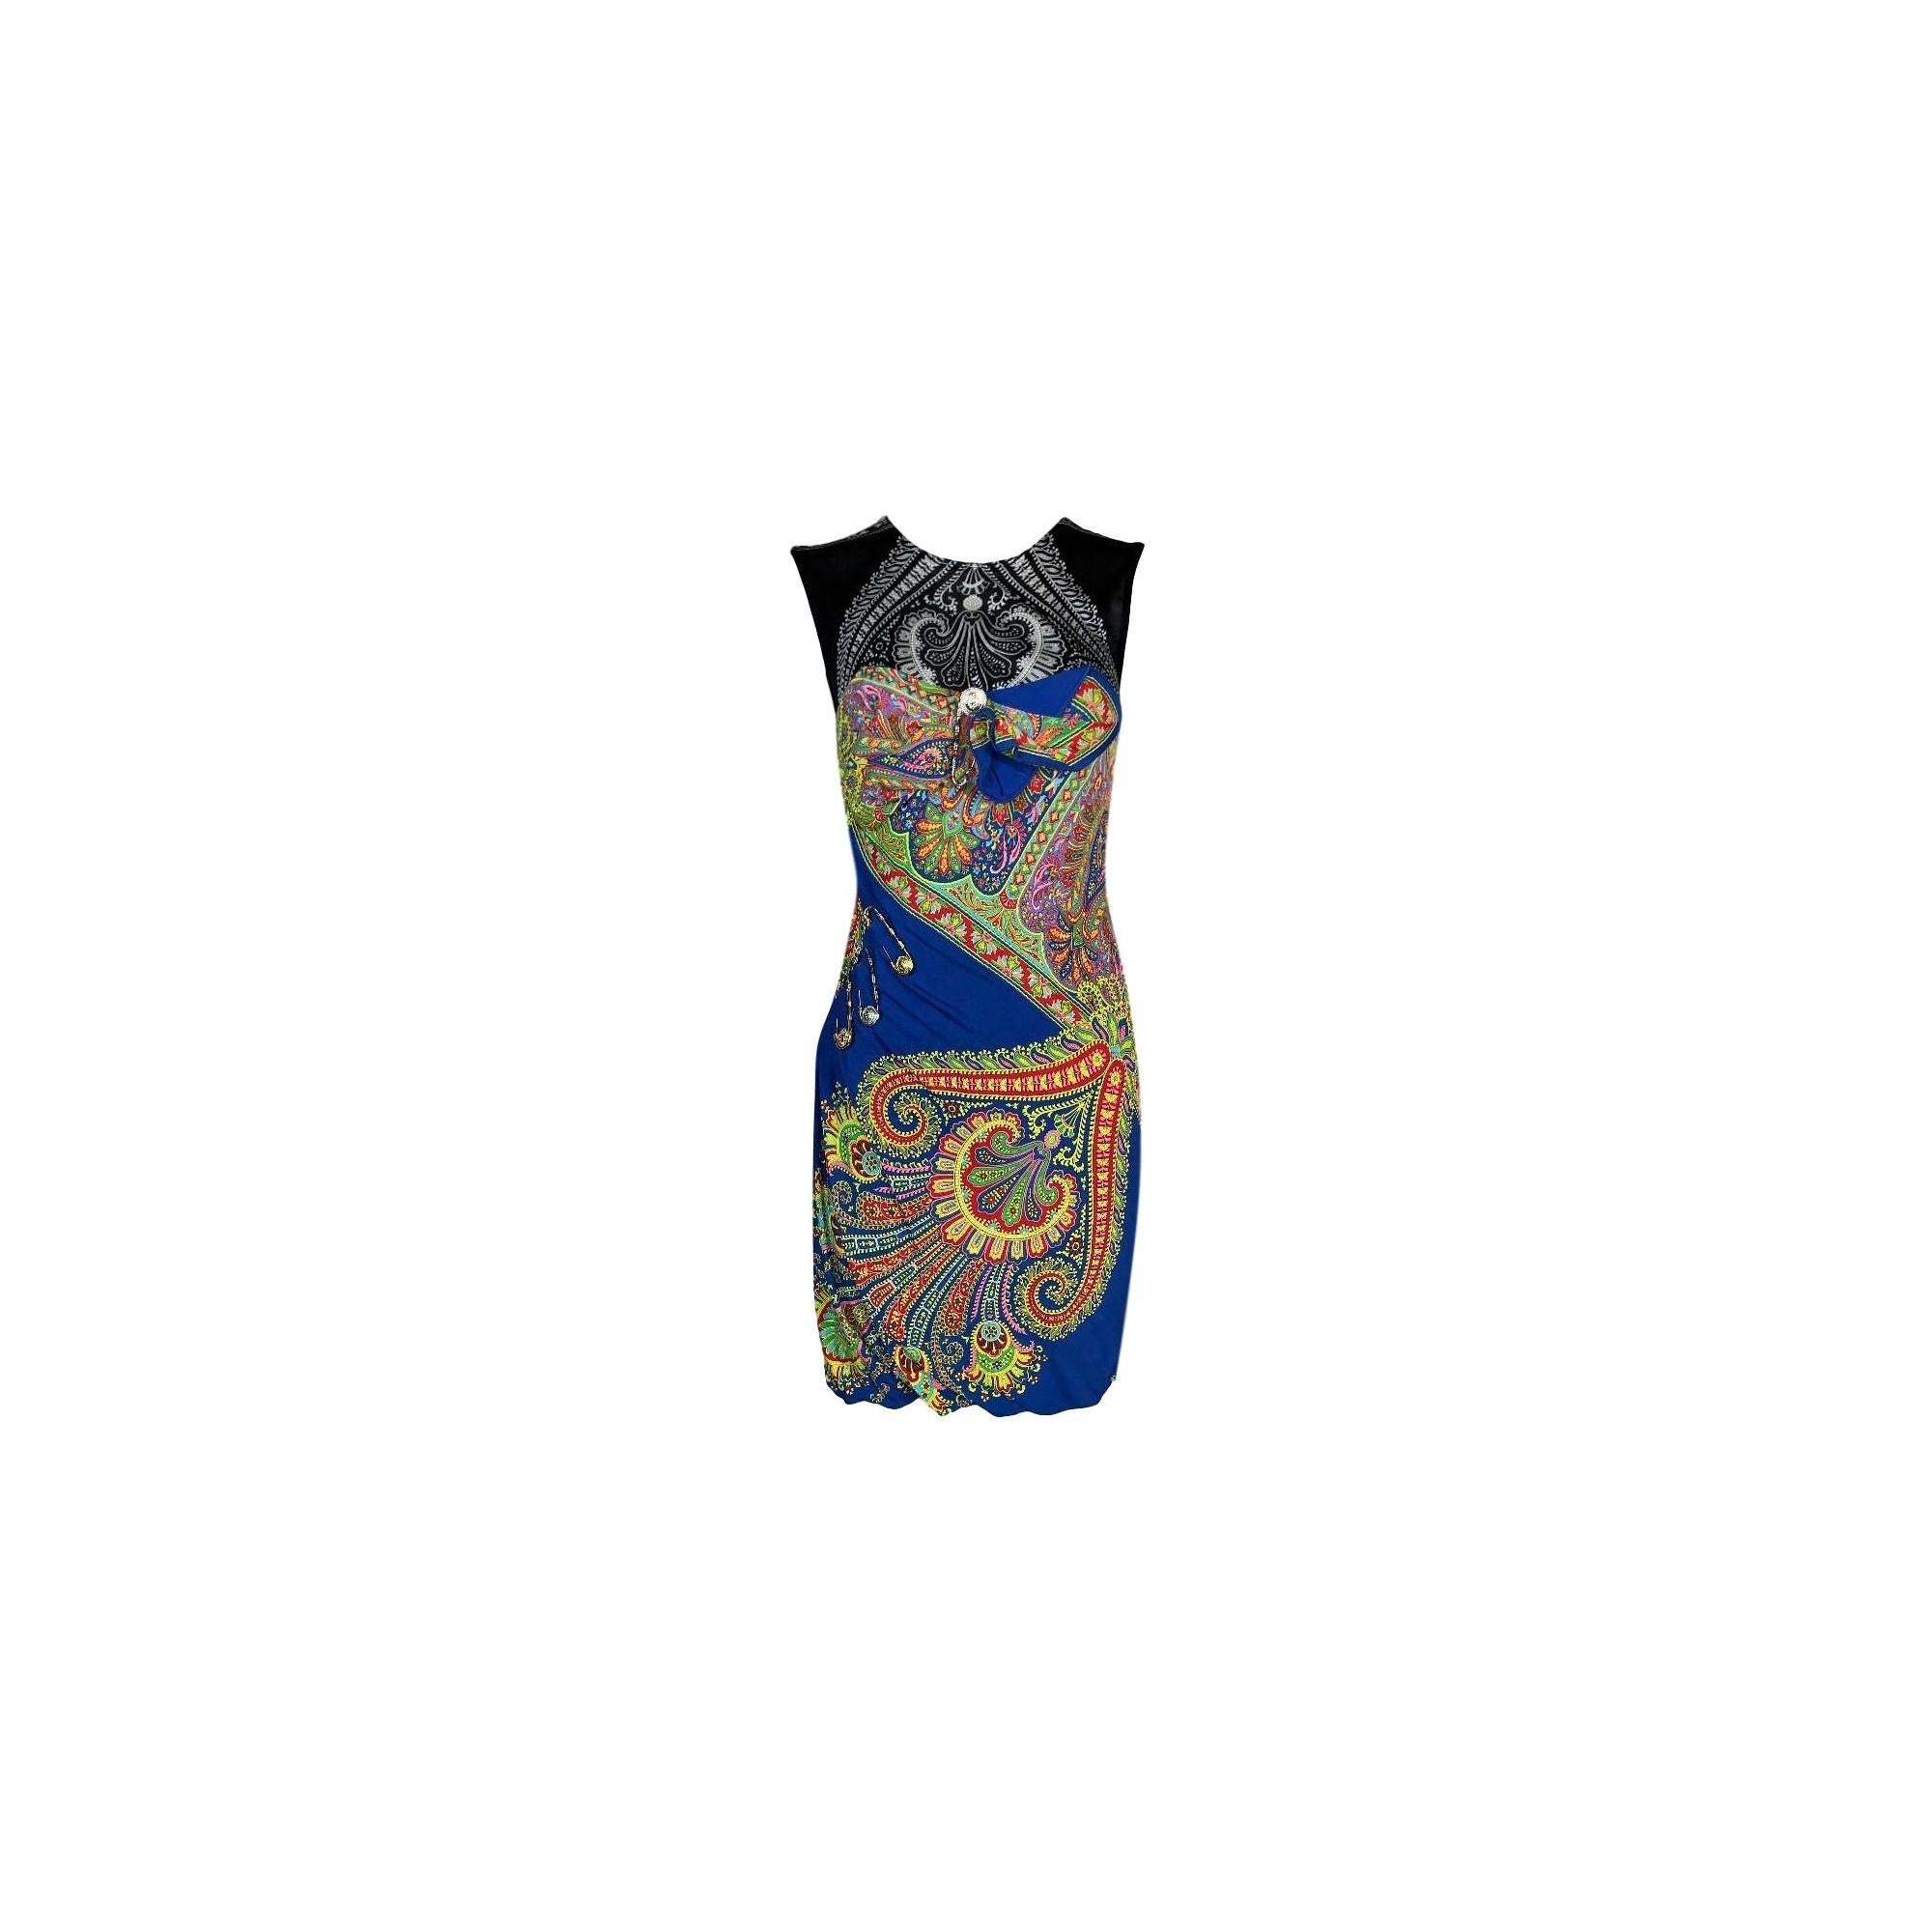 DESIGNER: S/S 1994 Gianni Versace- wrap dress closed by large safety pins with a romper underneath. 

Please contact for more information and/or photos.

CONDITION: Good- No holes or stains

FABRIC: Viscose & Rayon

COUNTRY MADE: Italy

SIZE: